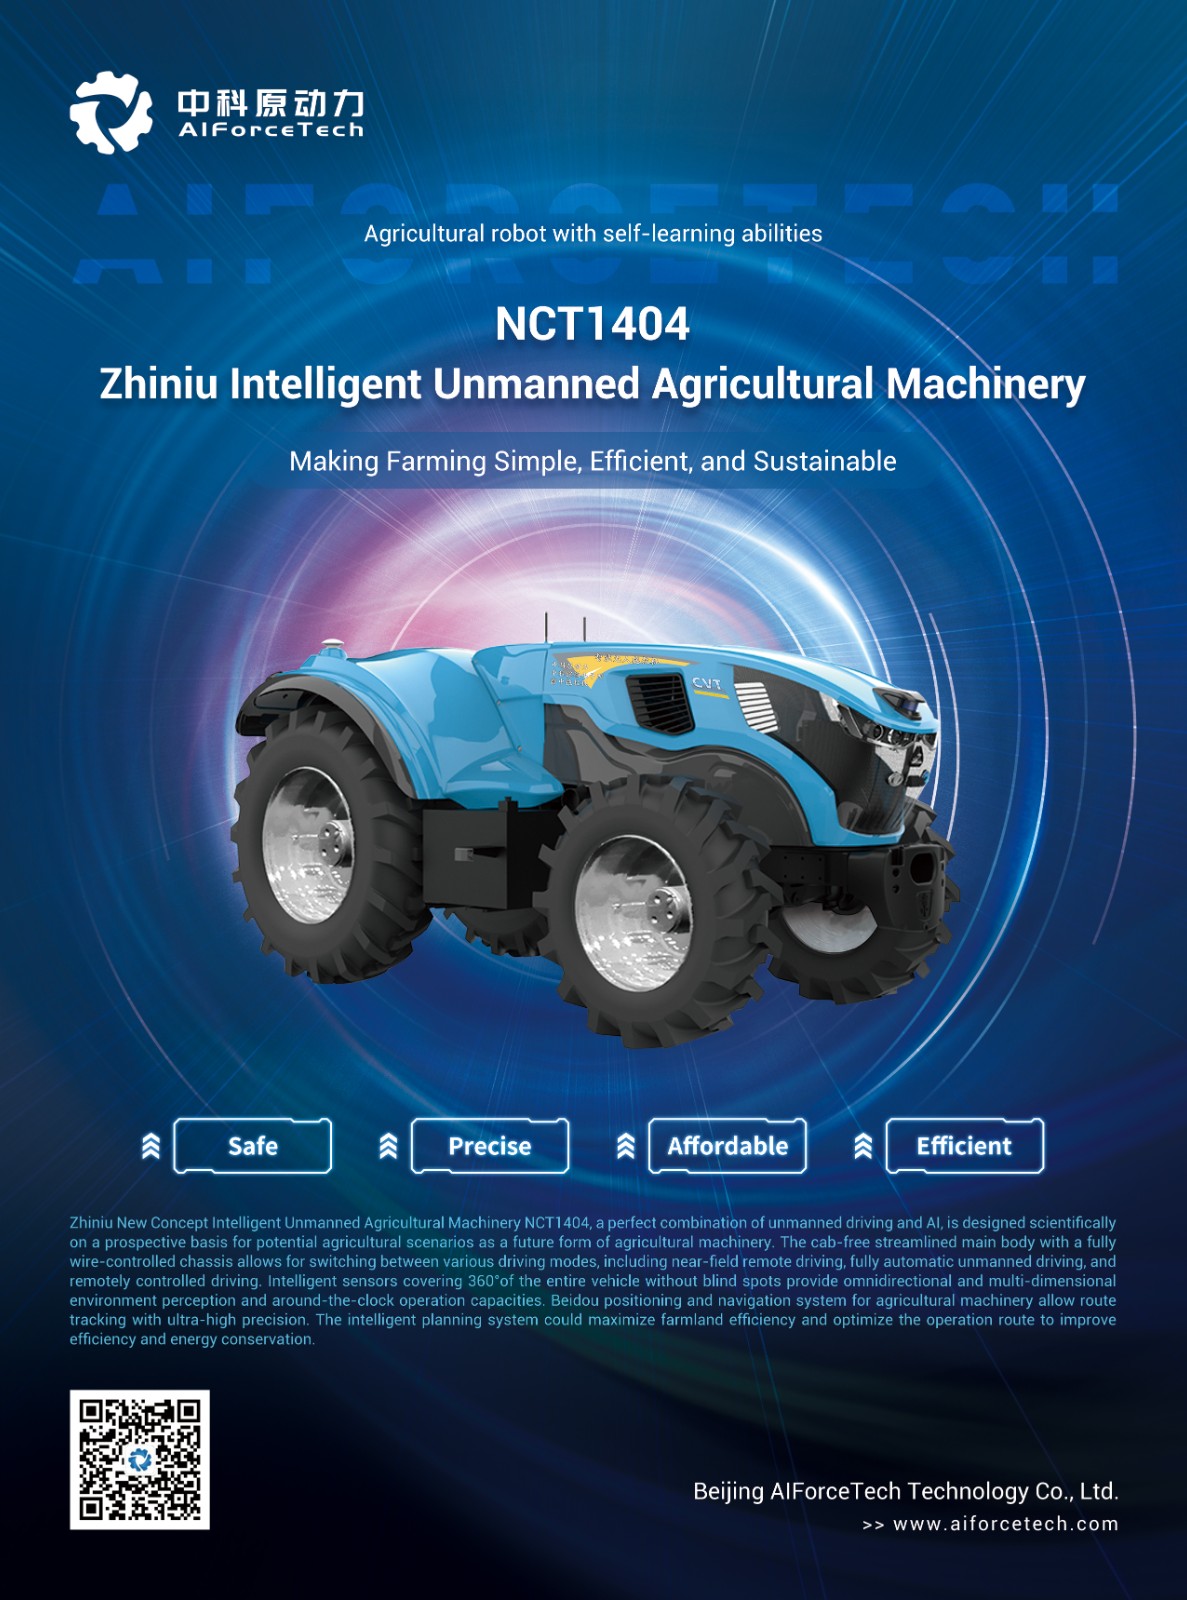 NCT 1404 Zhiniu Intelligent Unmanned Agricultural Machinery